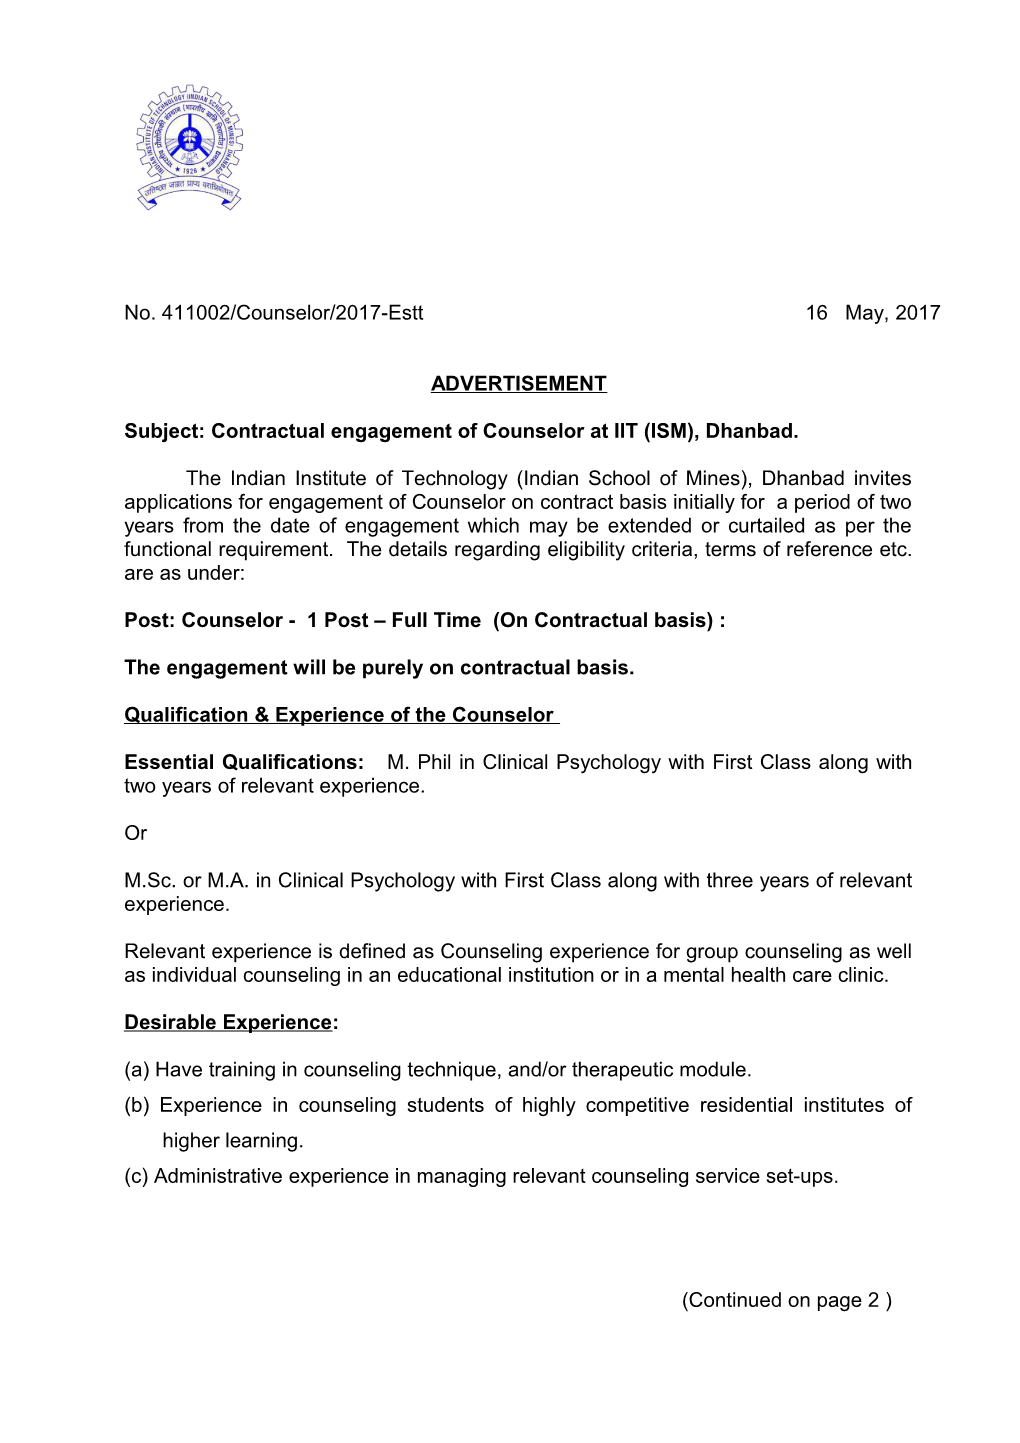 Subject: Contractual Engagement of Counselor at IIT (ISM), Dhanbad